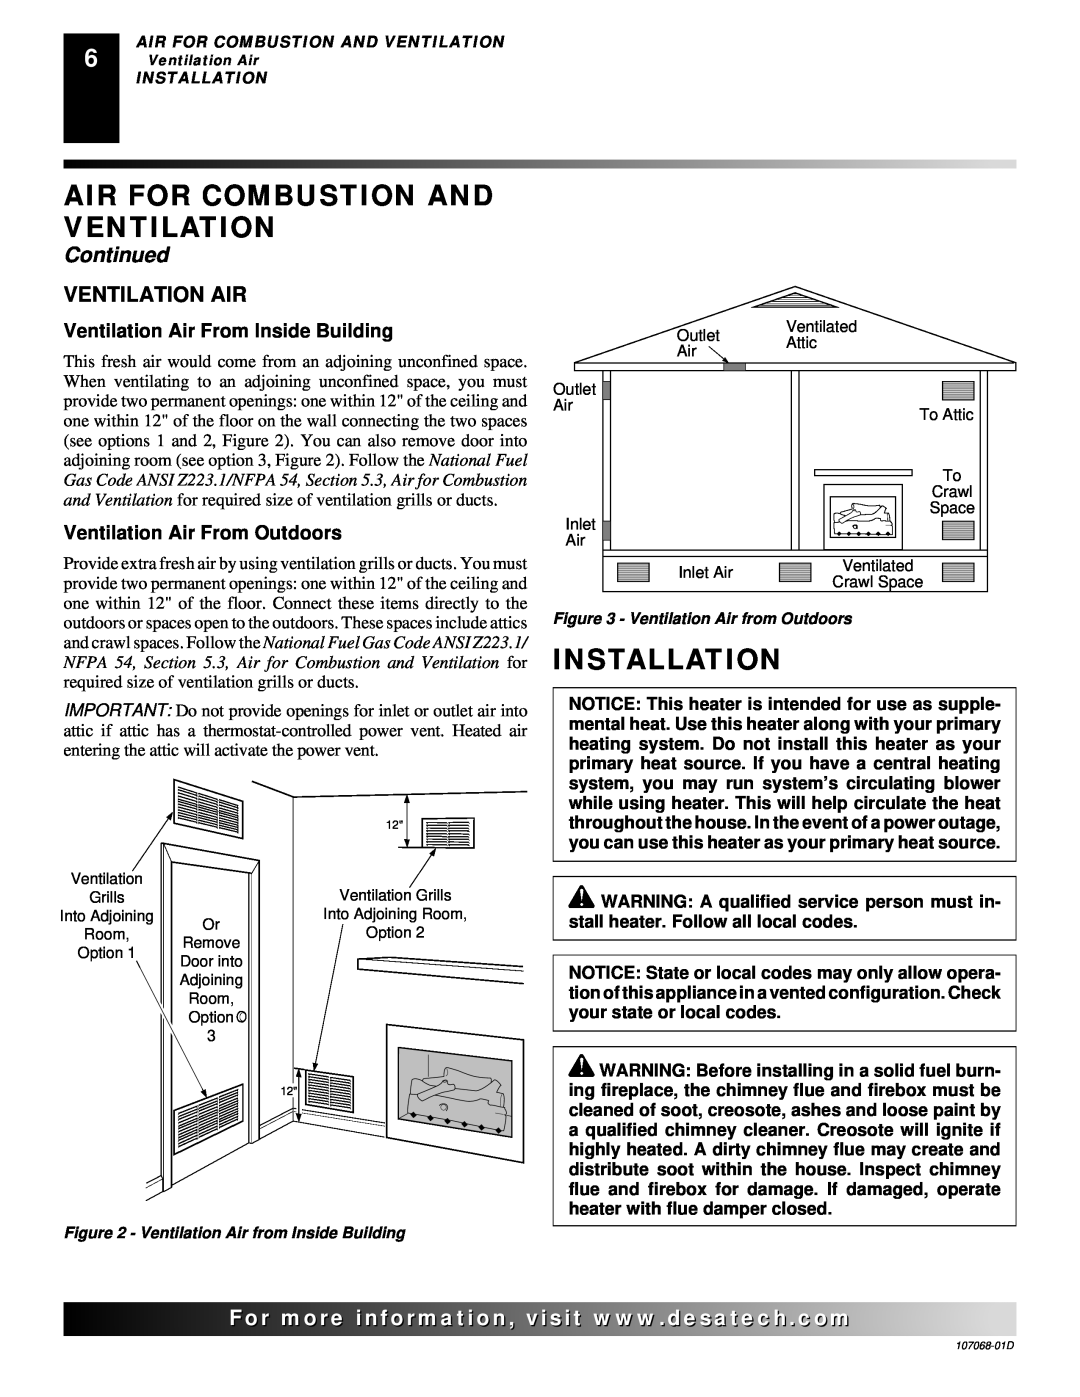 Desa CGS3124P Installation, Air For Combustion And Ventilation, Continued, Ventilation Air from Outdoors 